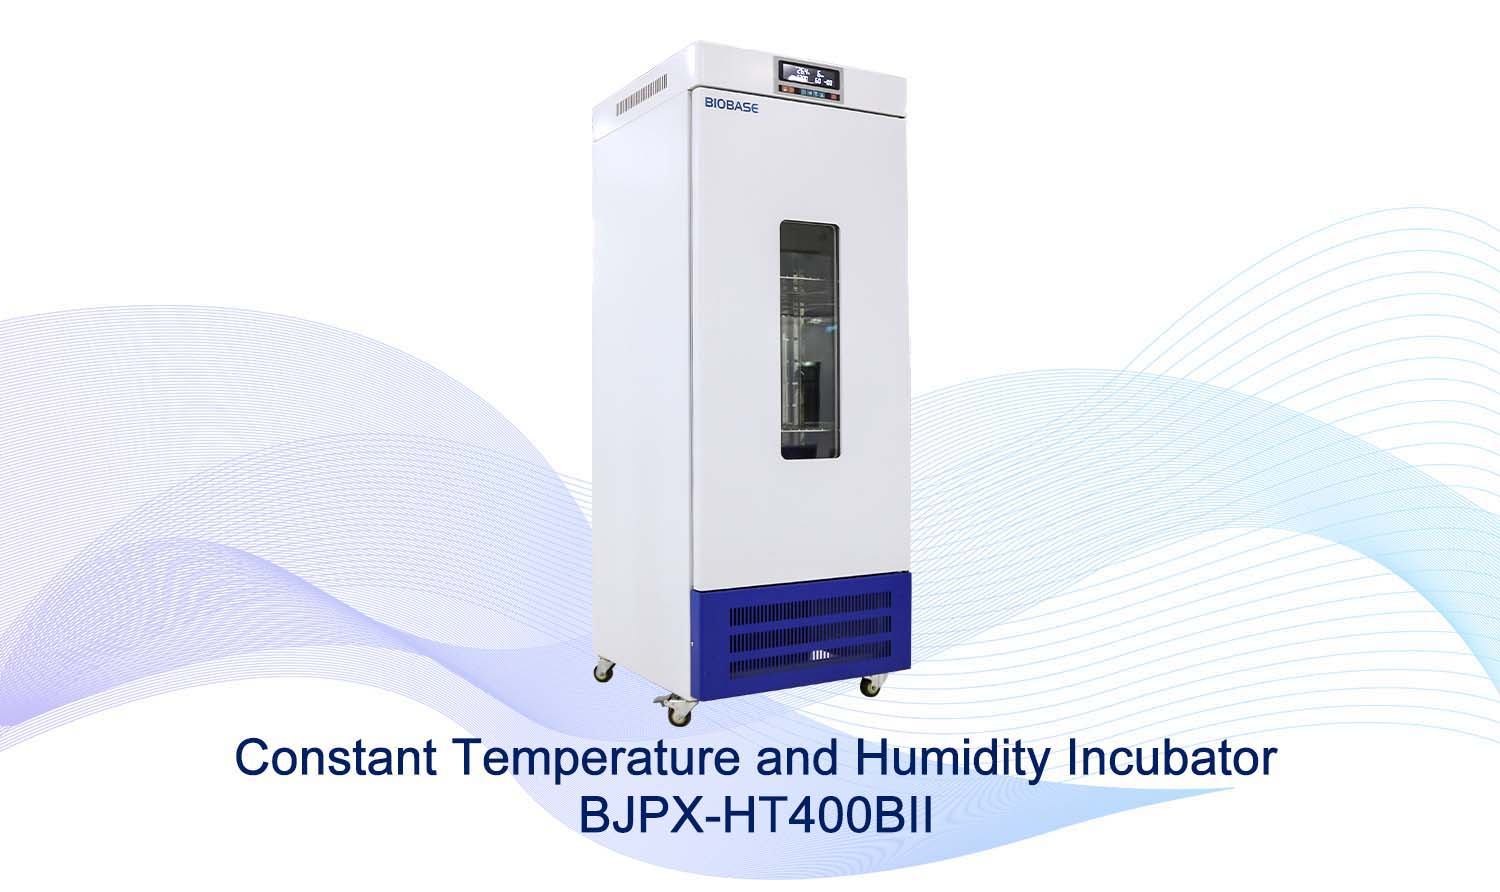 Please check the "Air pollution detection instrument solution"